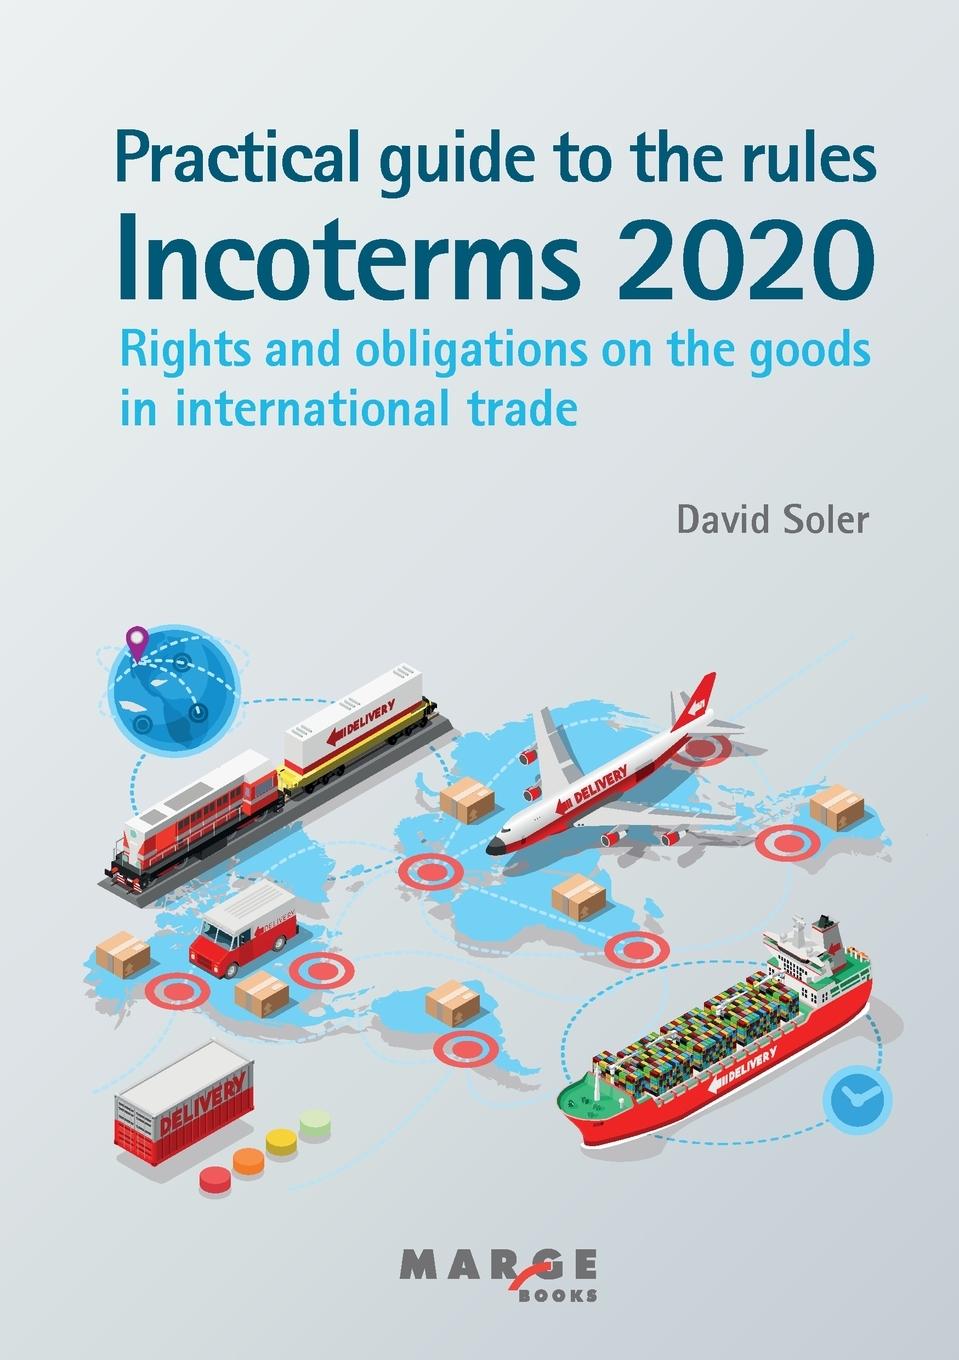 Knjiga Practical guide to the Incoterms 2020 rules David Soler